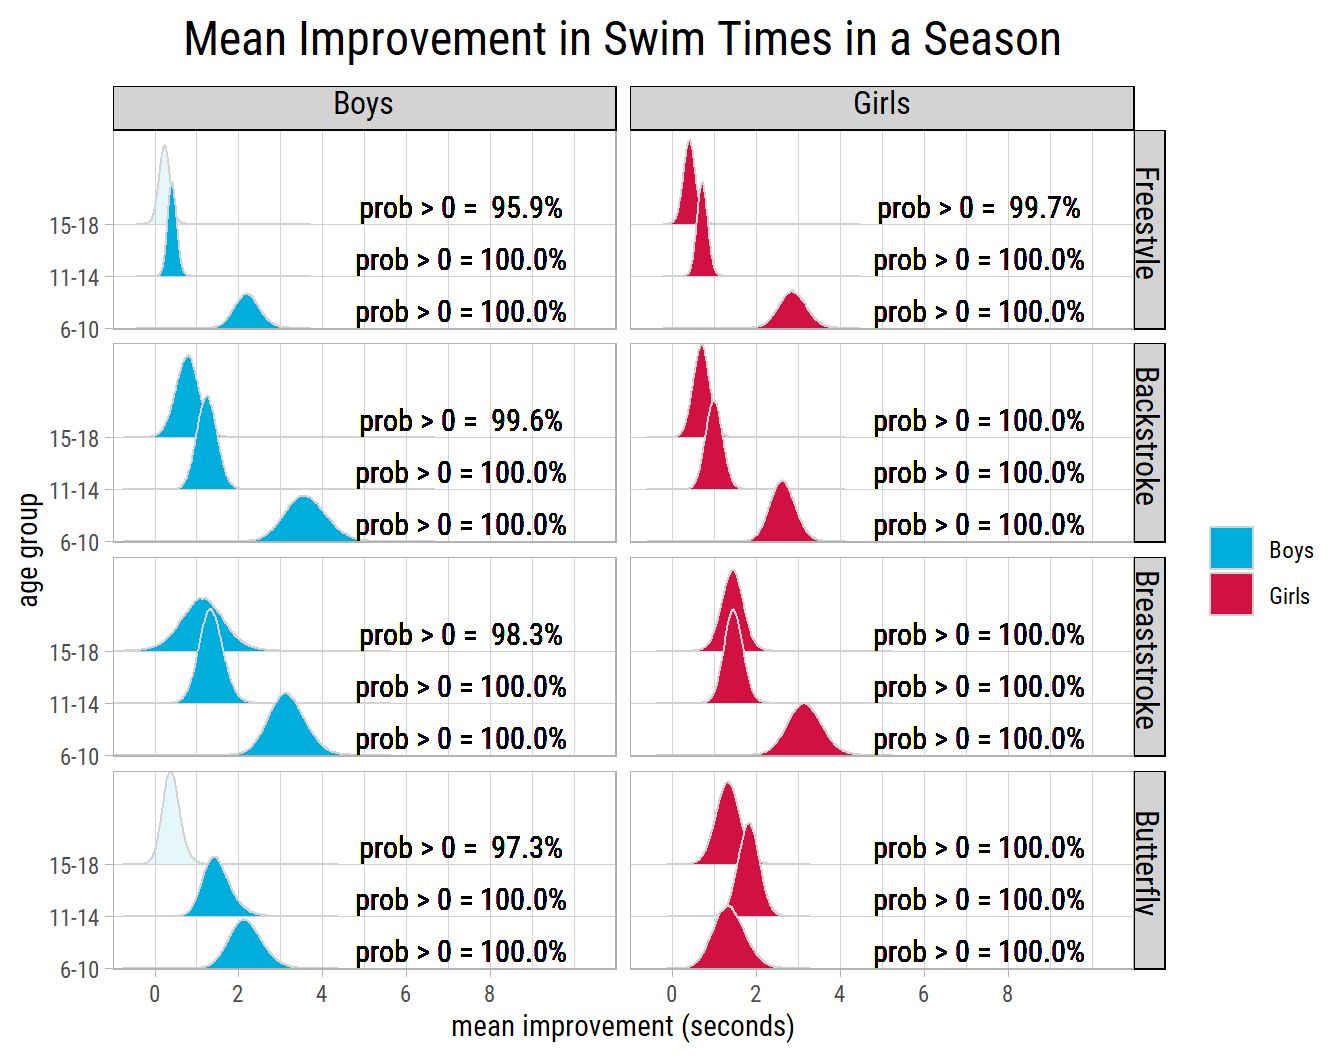 How Much Do Swimmers Improve in a Season?